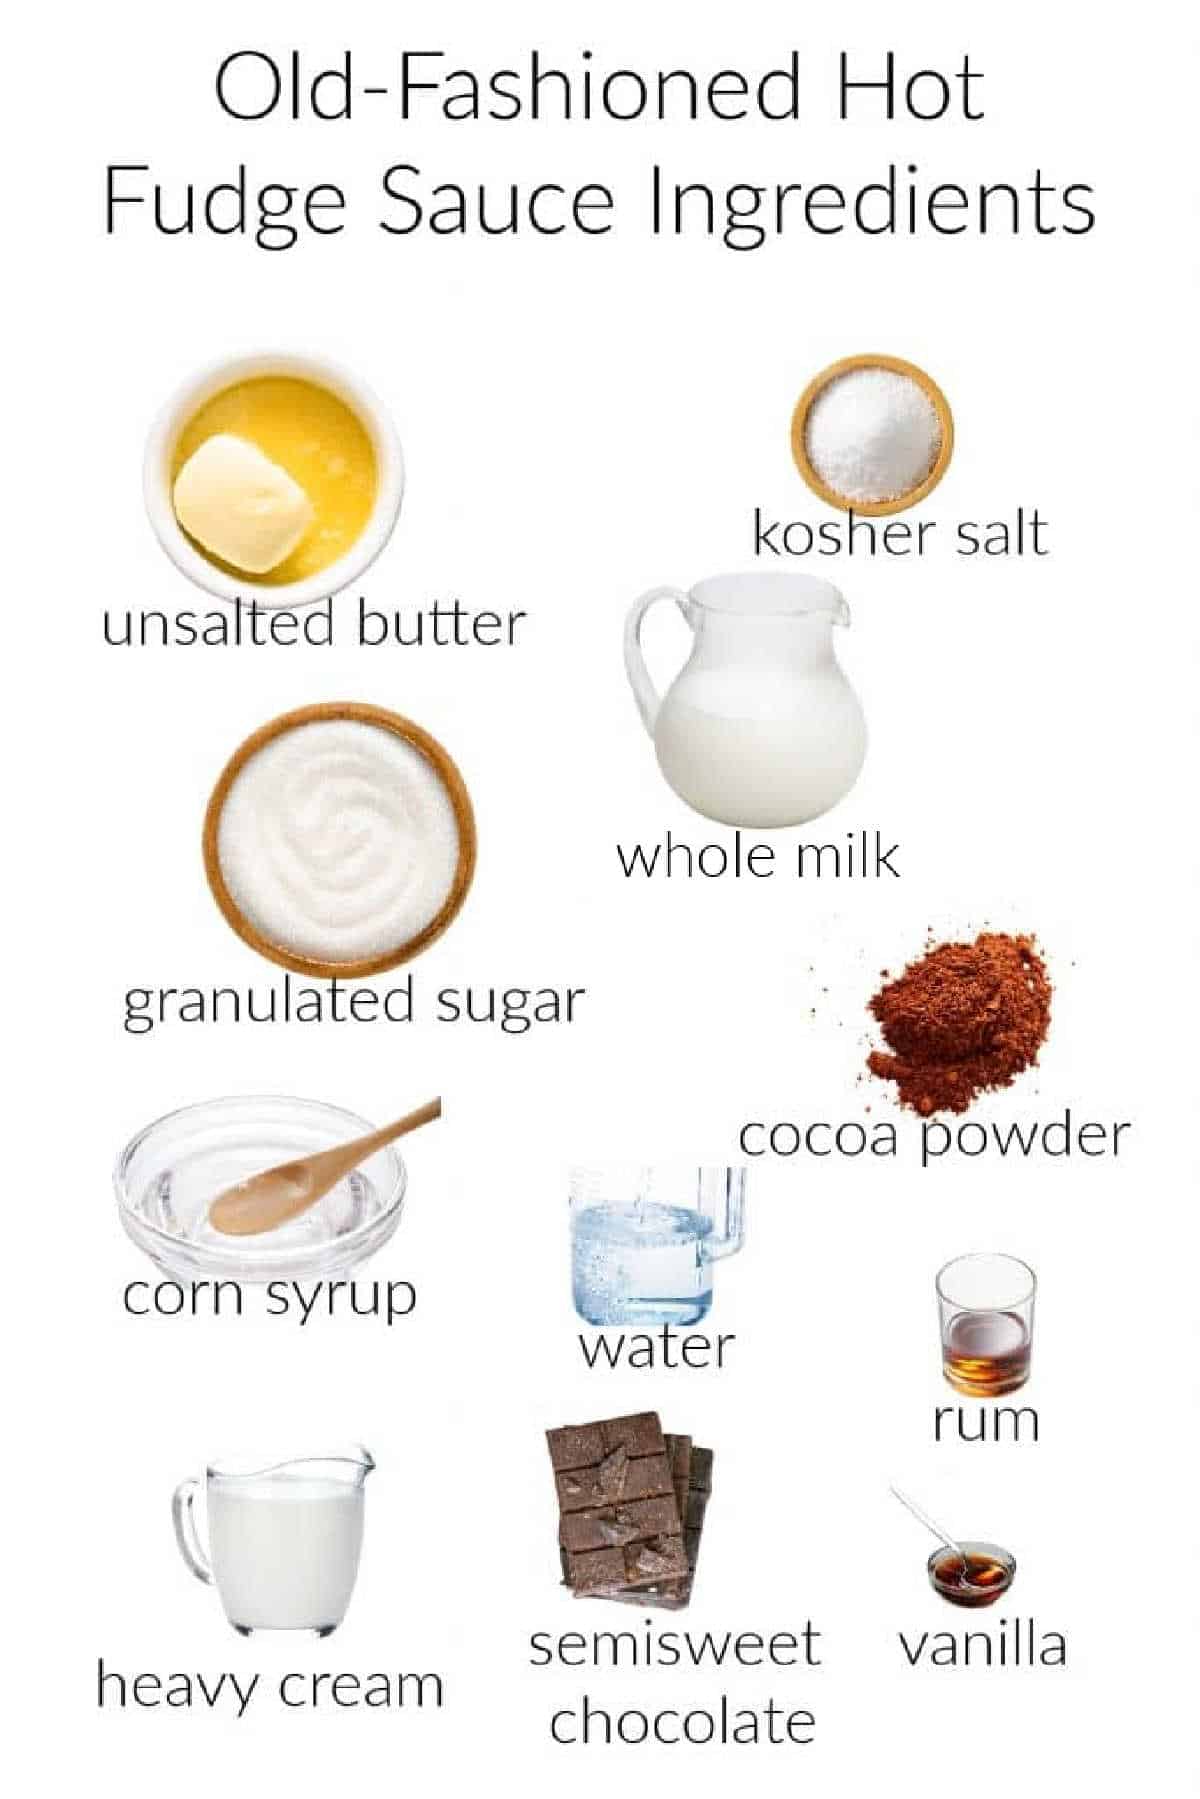 Images of all the ingredients needed to make hot fudge sauce, labeled and shot on a white background.